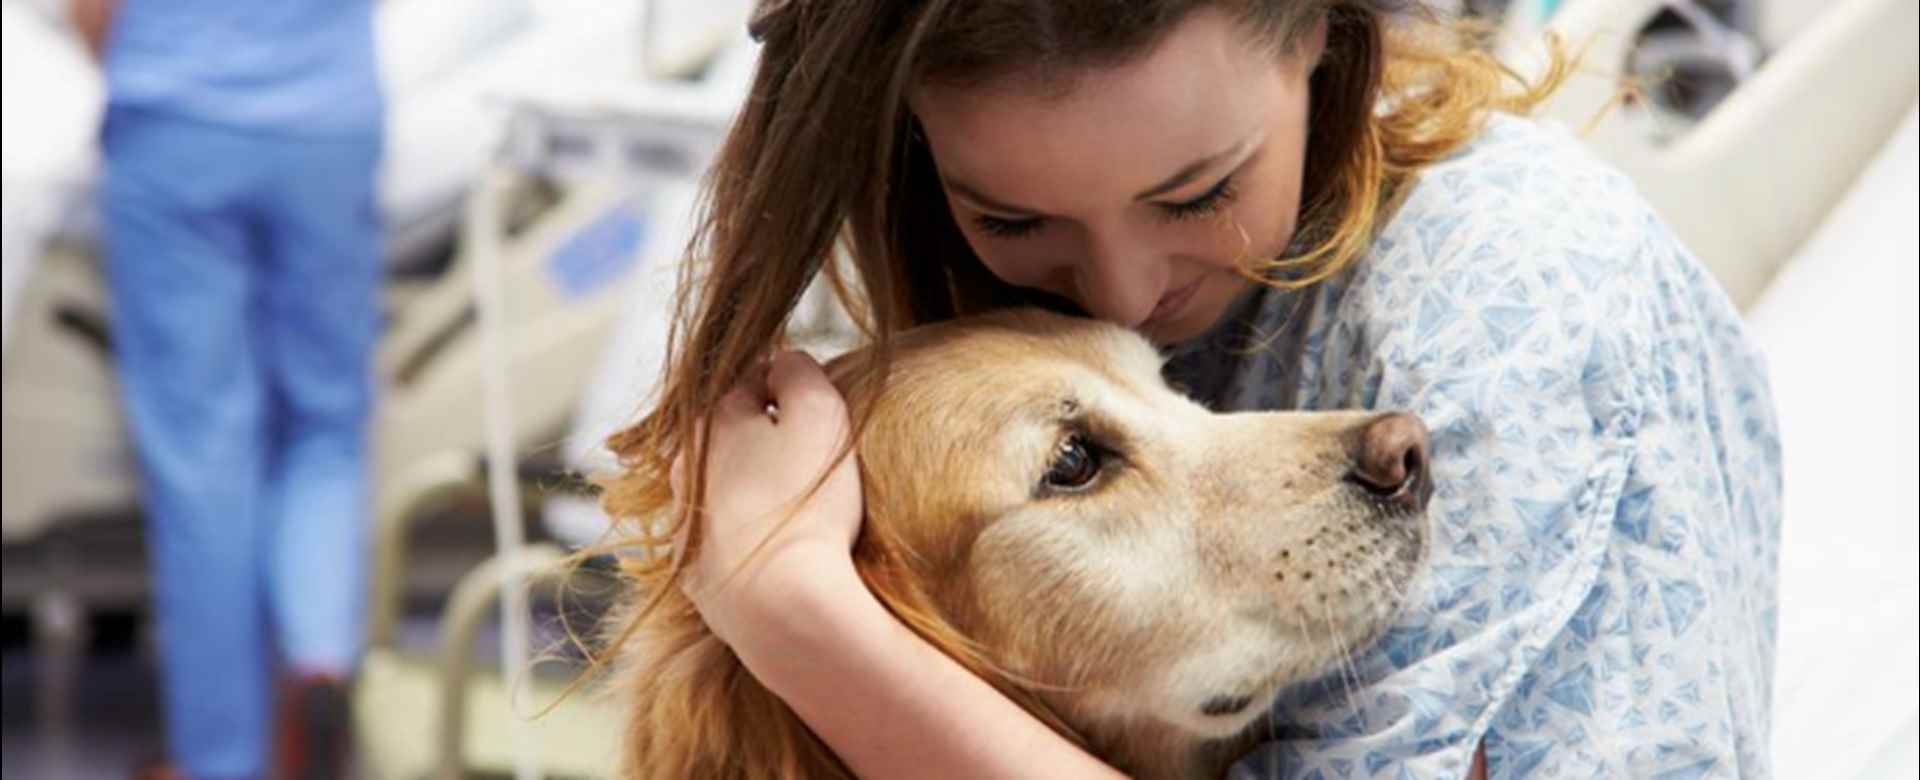 Animal-assisted Therapy | Advanced Medical Reviews